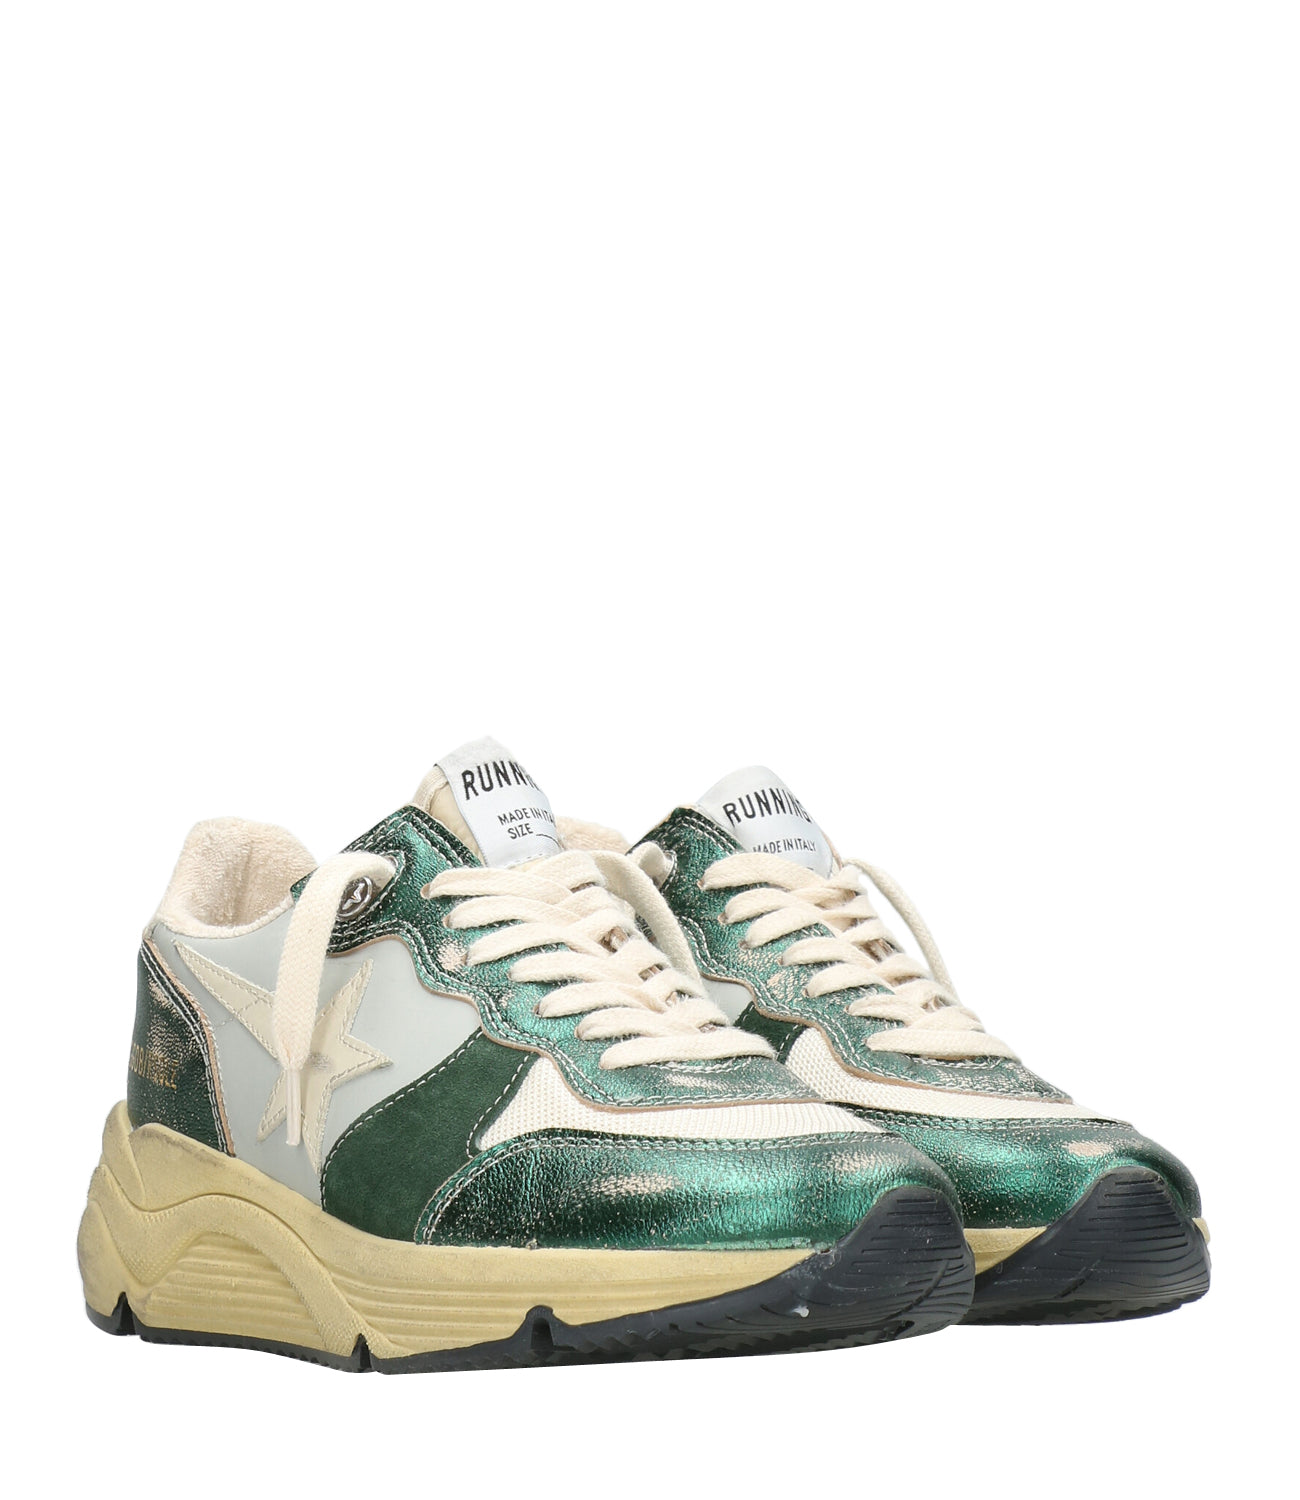 Golden Goose | Running Sole Sneakers Green, Cream and Silver